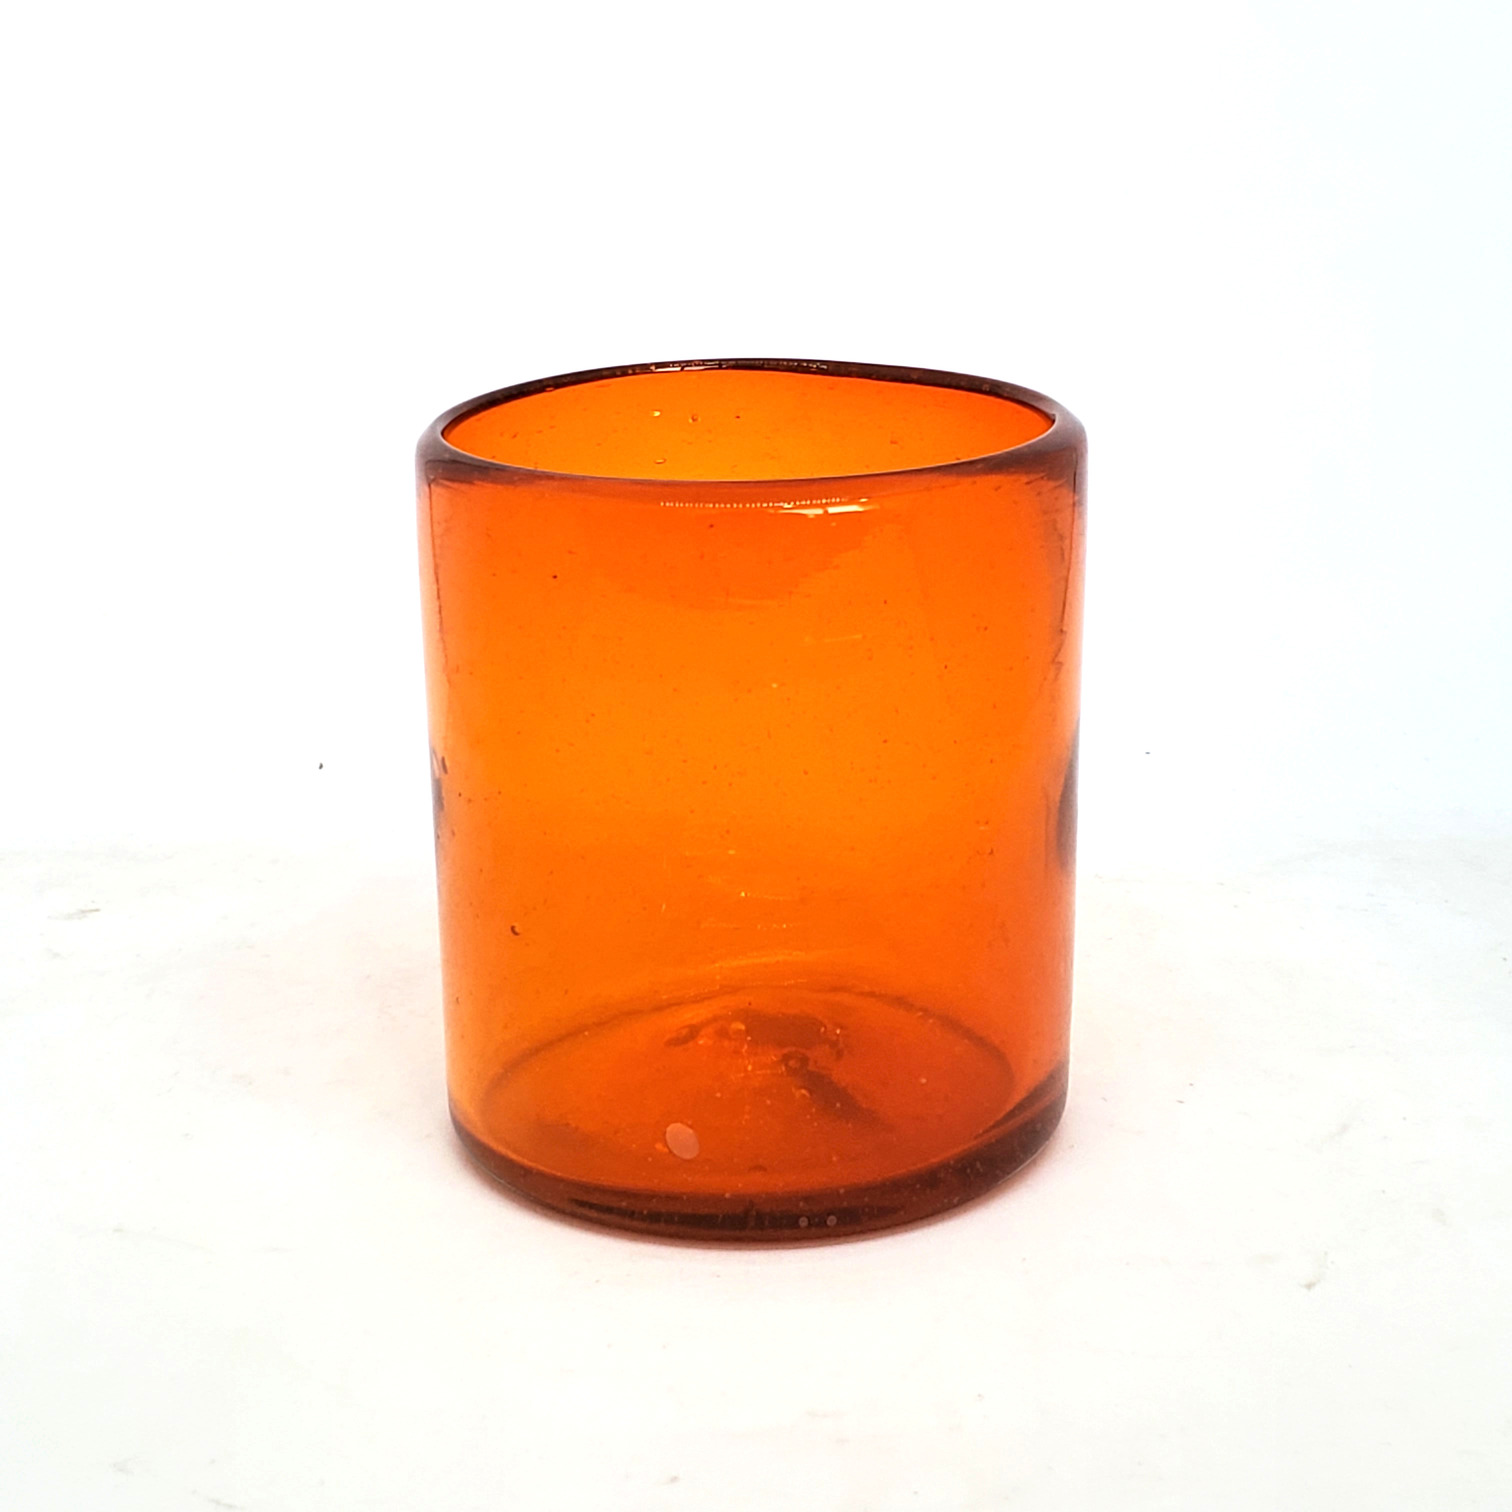 Wholesale Colored Glassware / Solid Orange 9 oz Short Tumblers  / Enhance your favorite drink with these colorful handcrafted glasses.